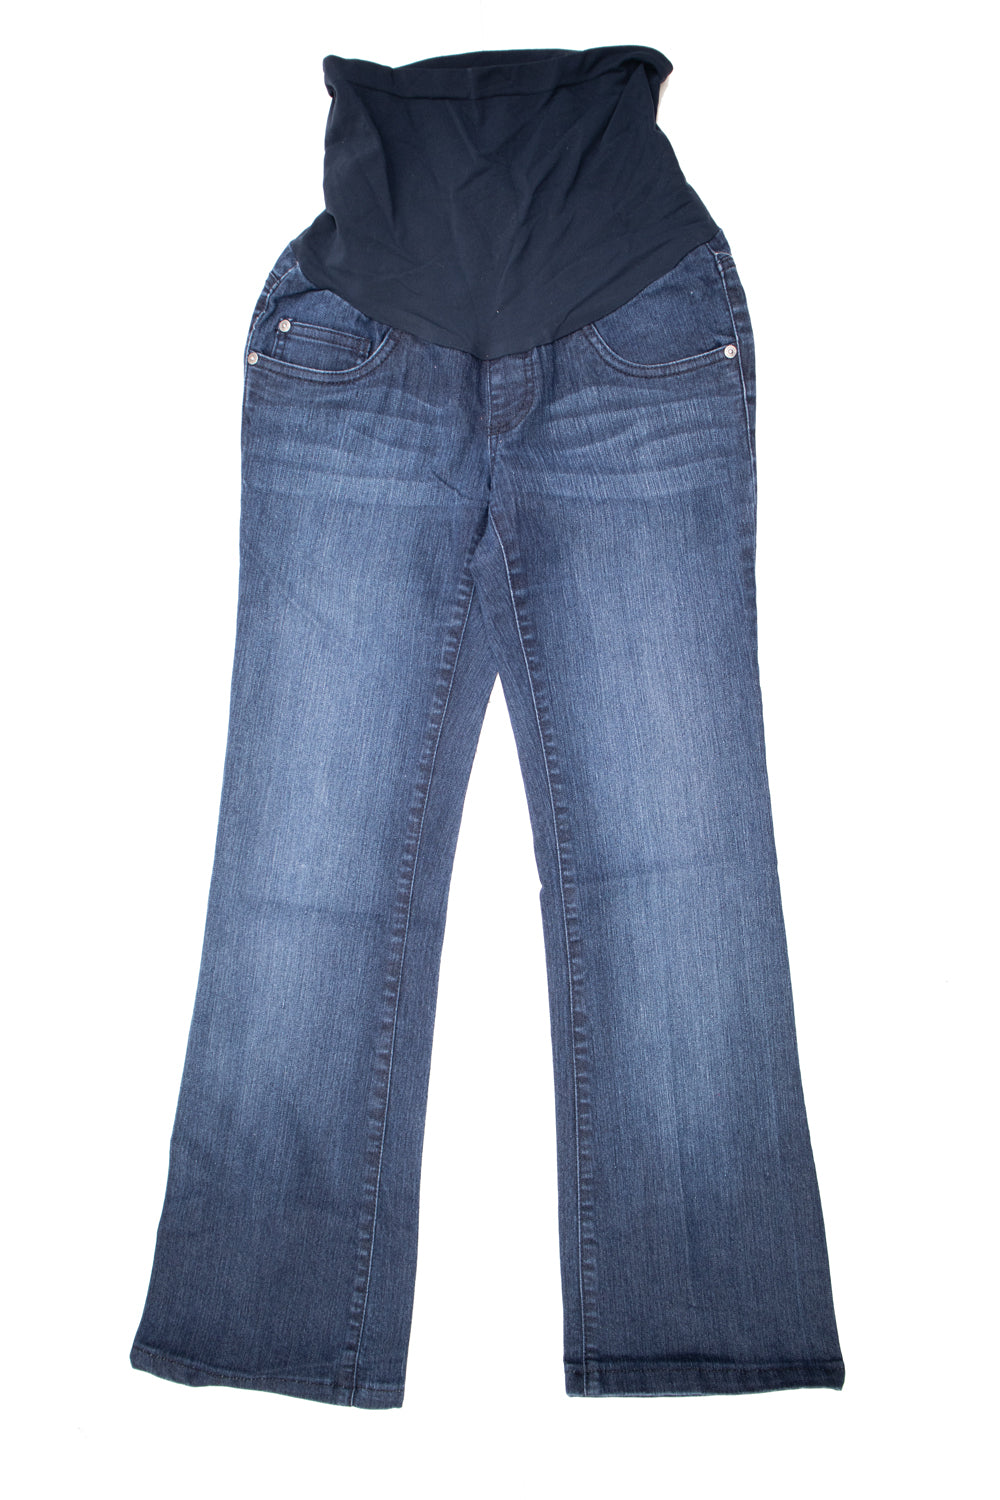 CLEARANCE XS Indigo Blue Maternity Bootcut Jeans